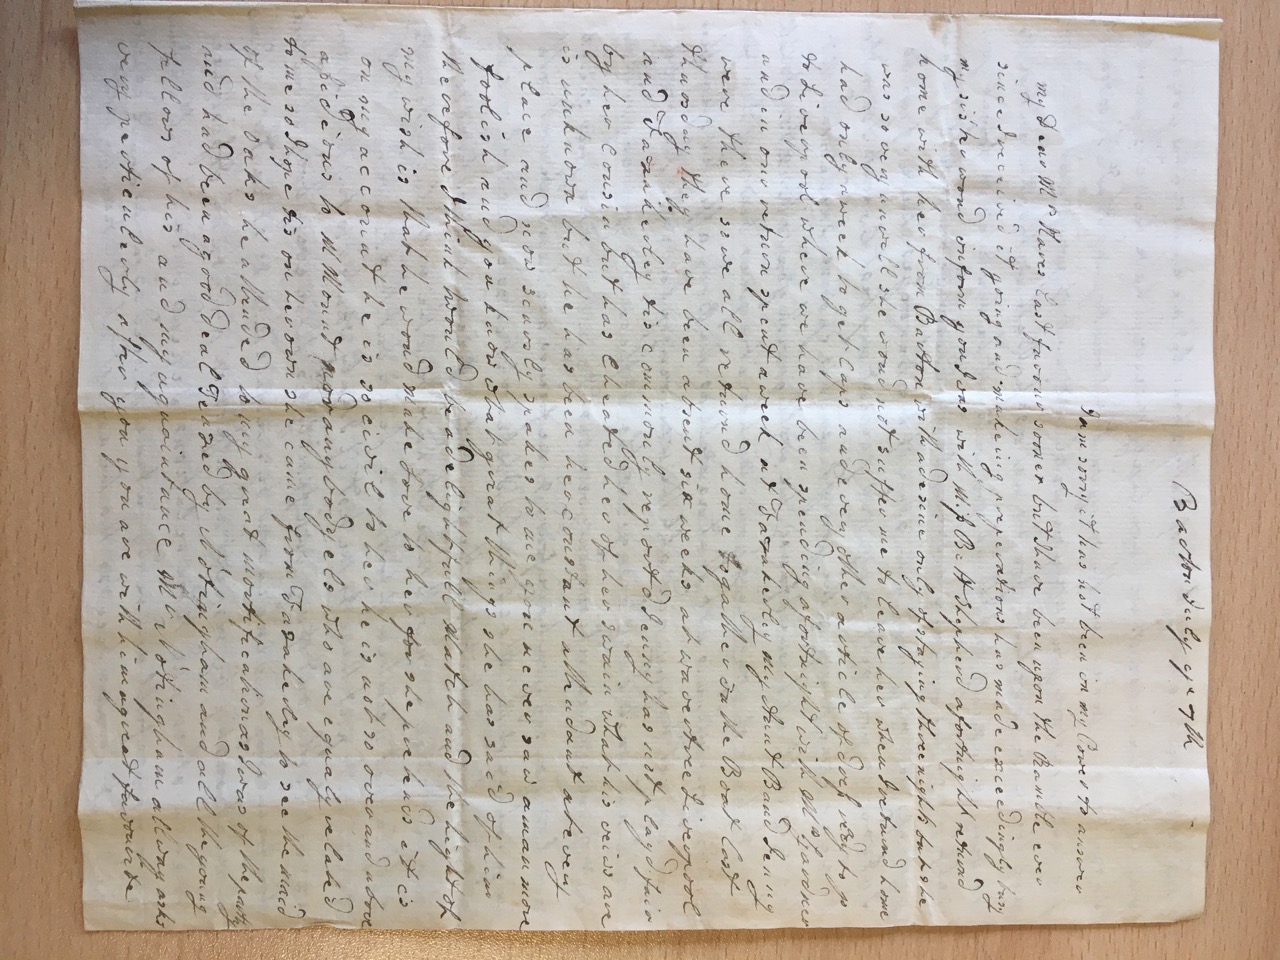 Image #1 of letter: Mary Ann Hesketh to Ann Hare, 9 July